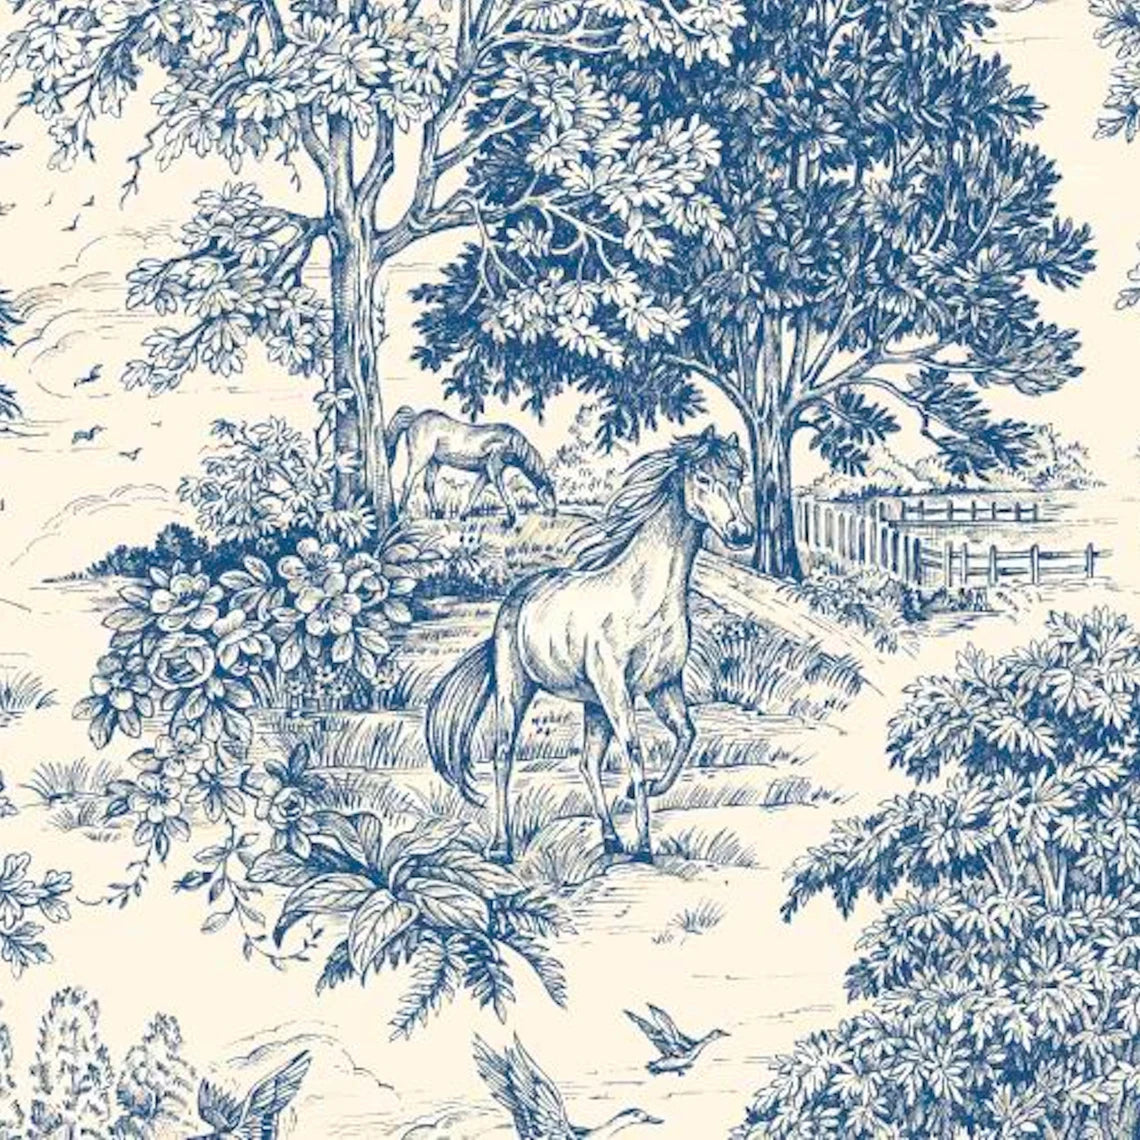 pinch pleated curtain panels pair in Yellowstone Bluebell Blue Country Toile- Horses, Deer, Dogs- Large Scale